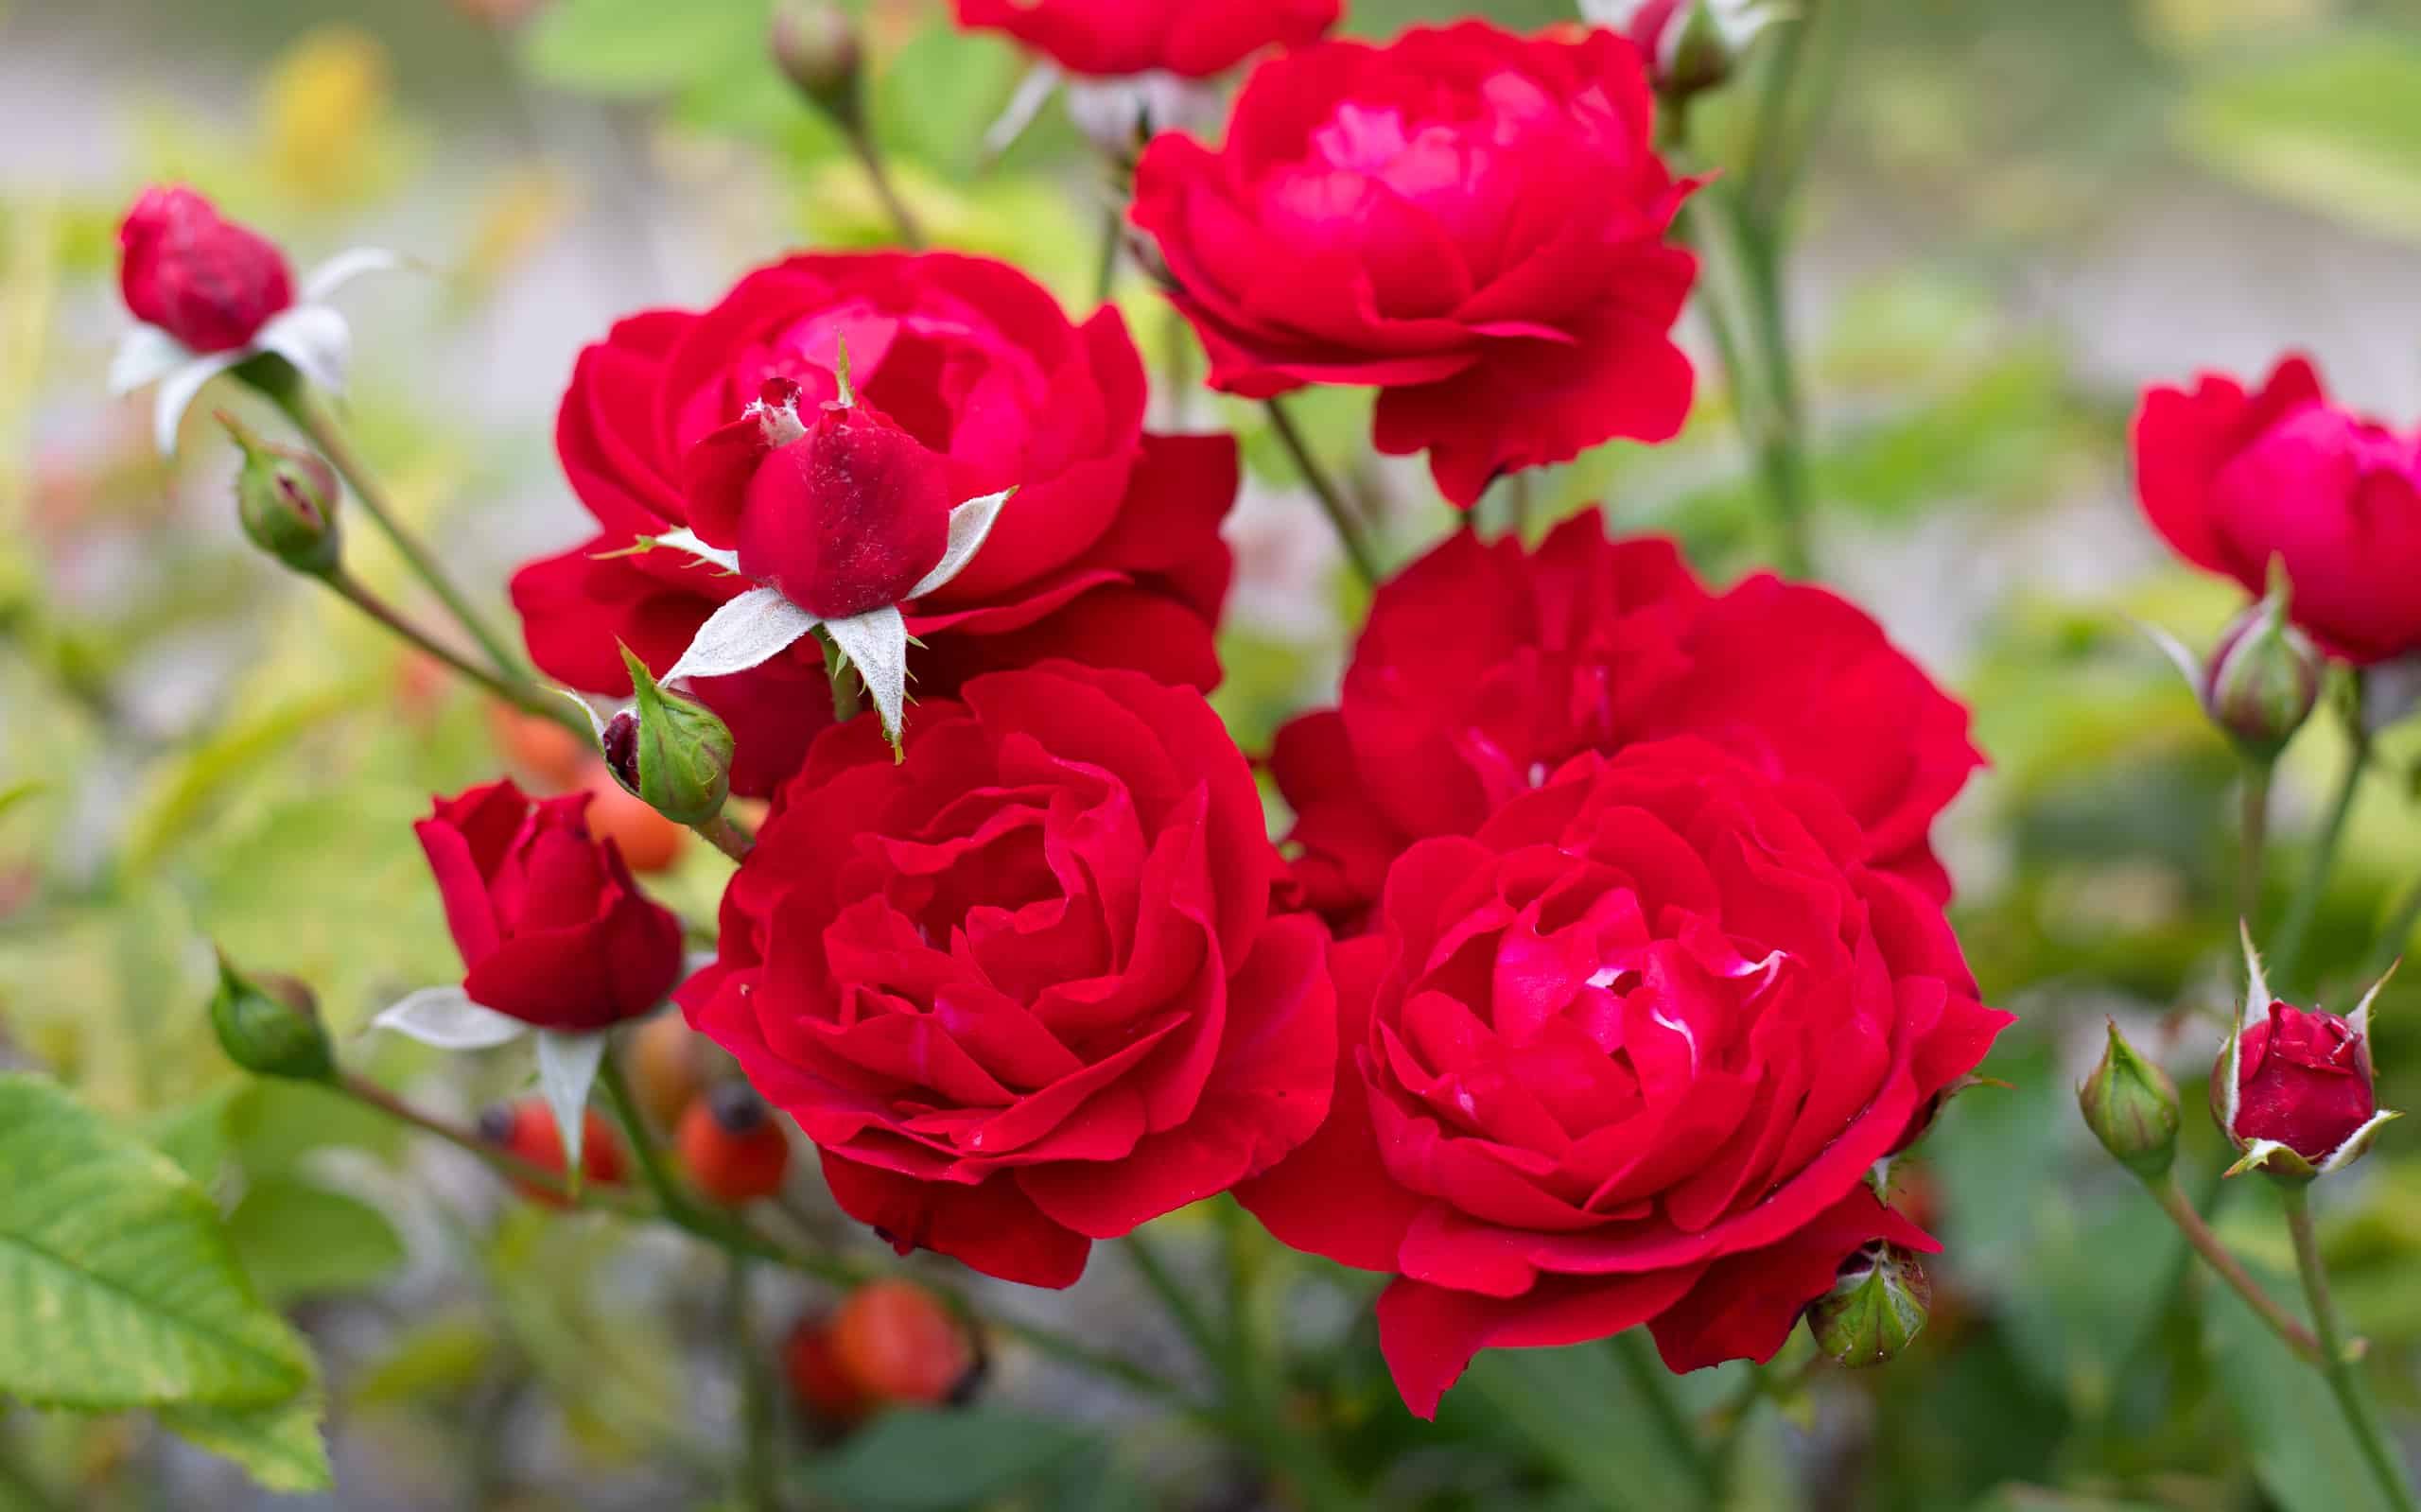 Red roses in a sunny garden